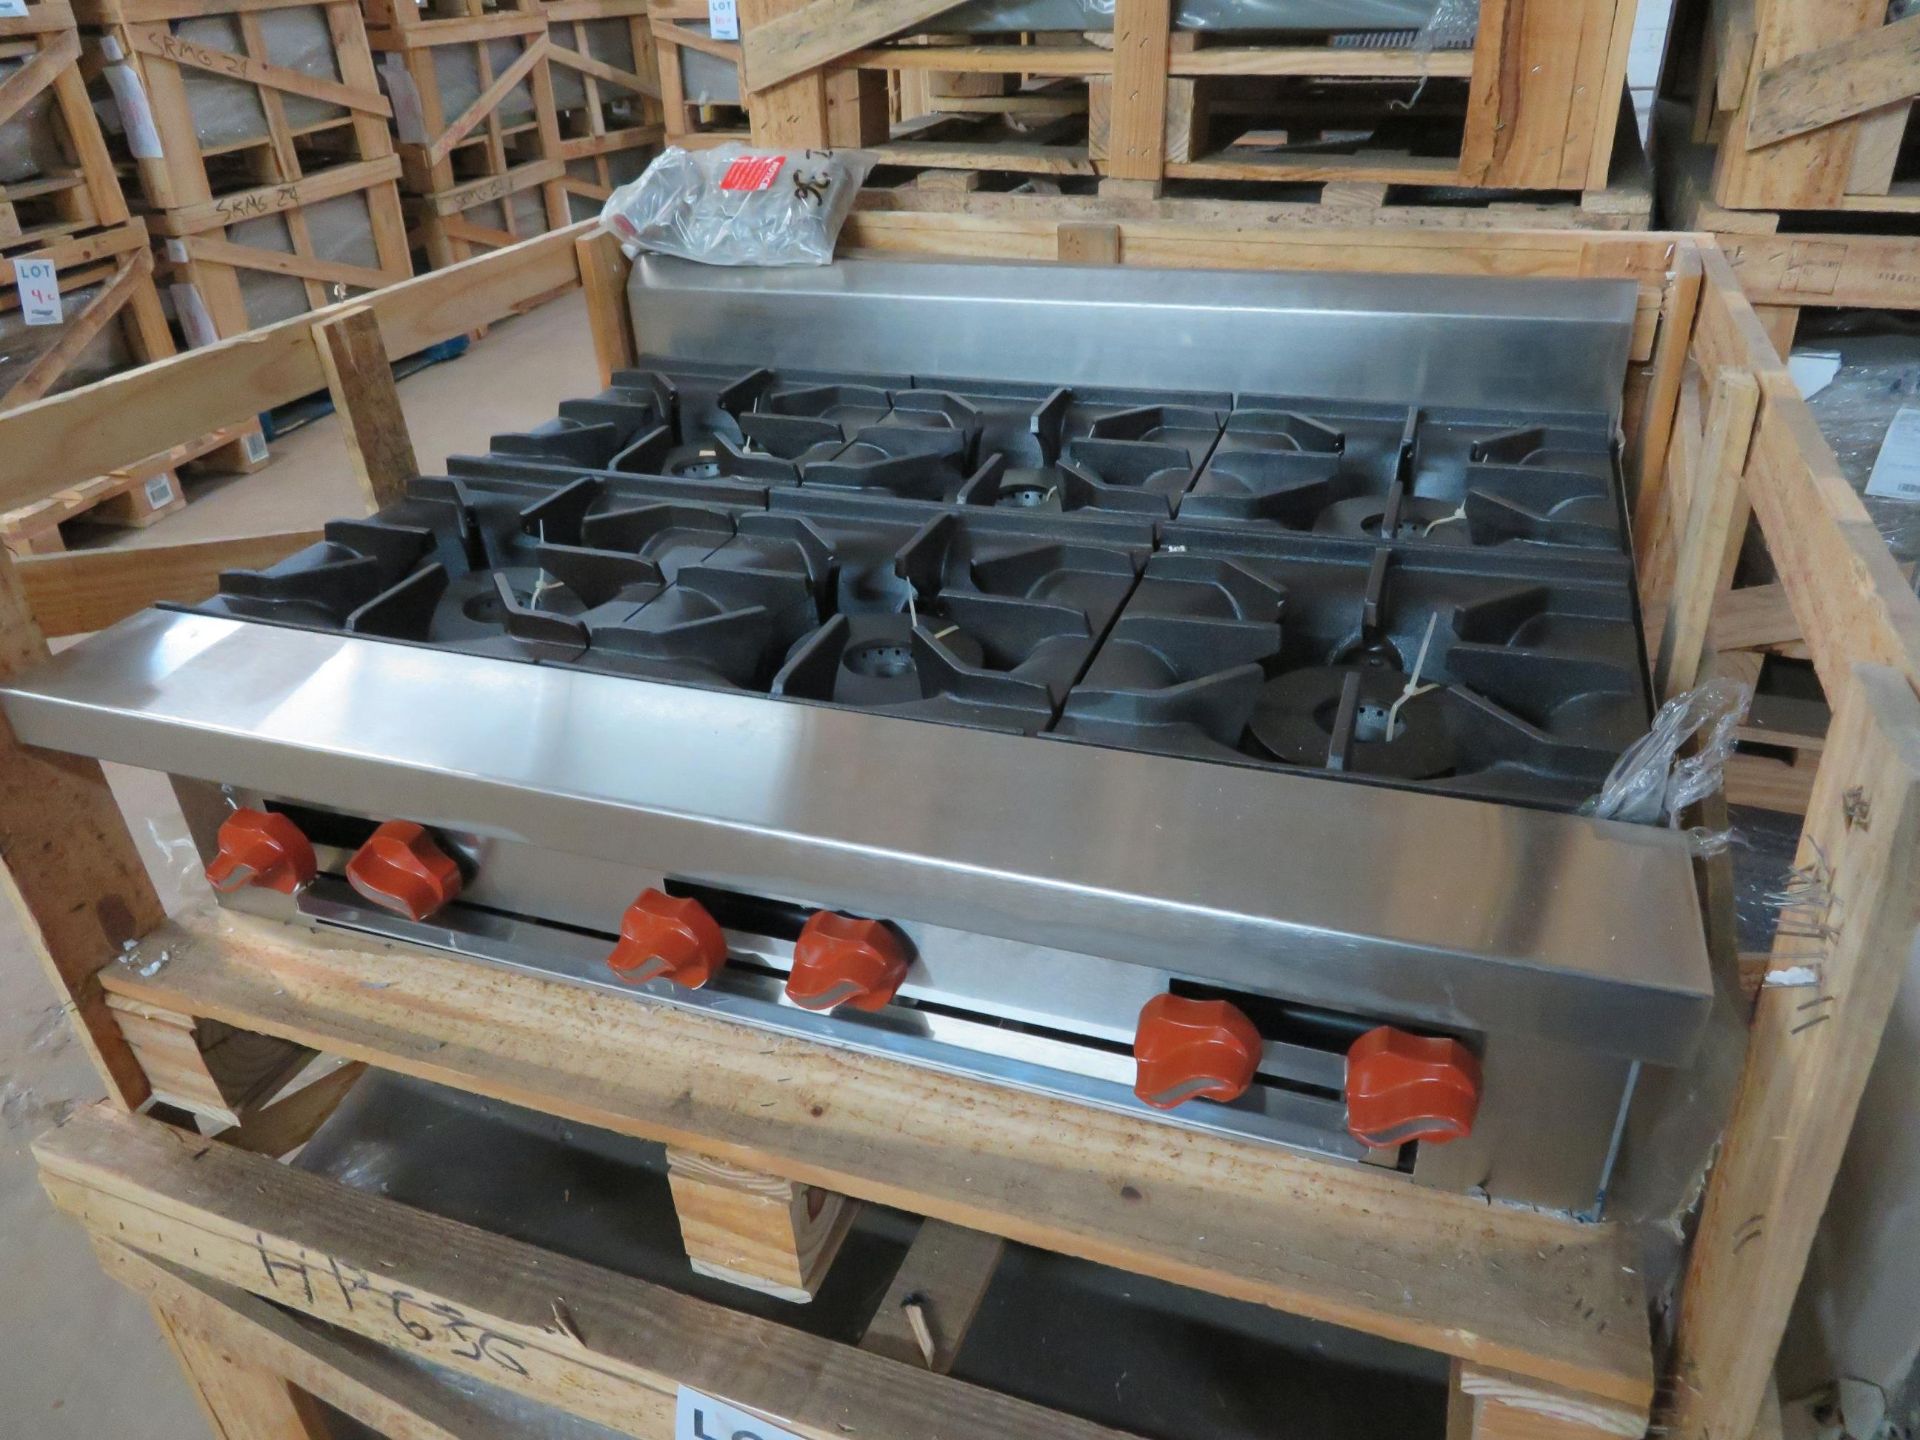 Brand New SIERRA gas 36"hot plate with 6 burners, Mod #SR-HP-6-36, approx. 36"w x 30"d x 9"h - Image 2 of 2